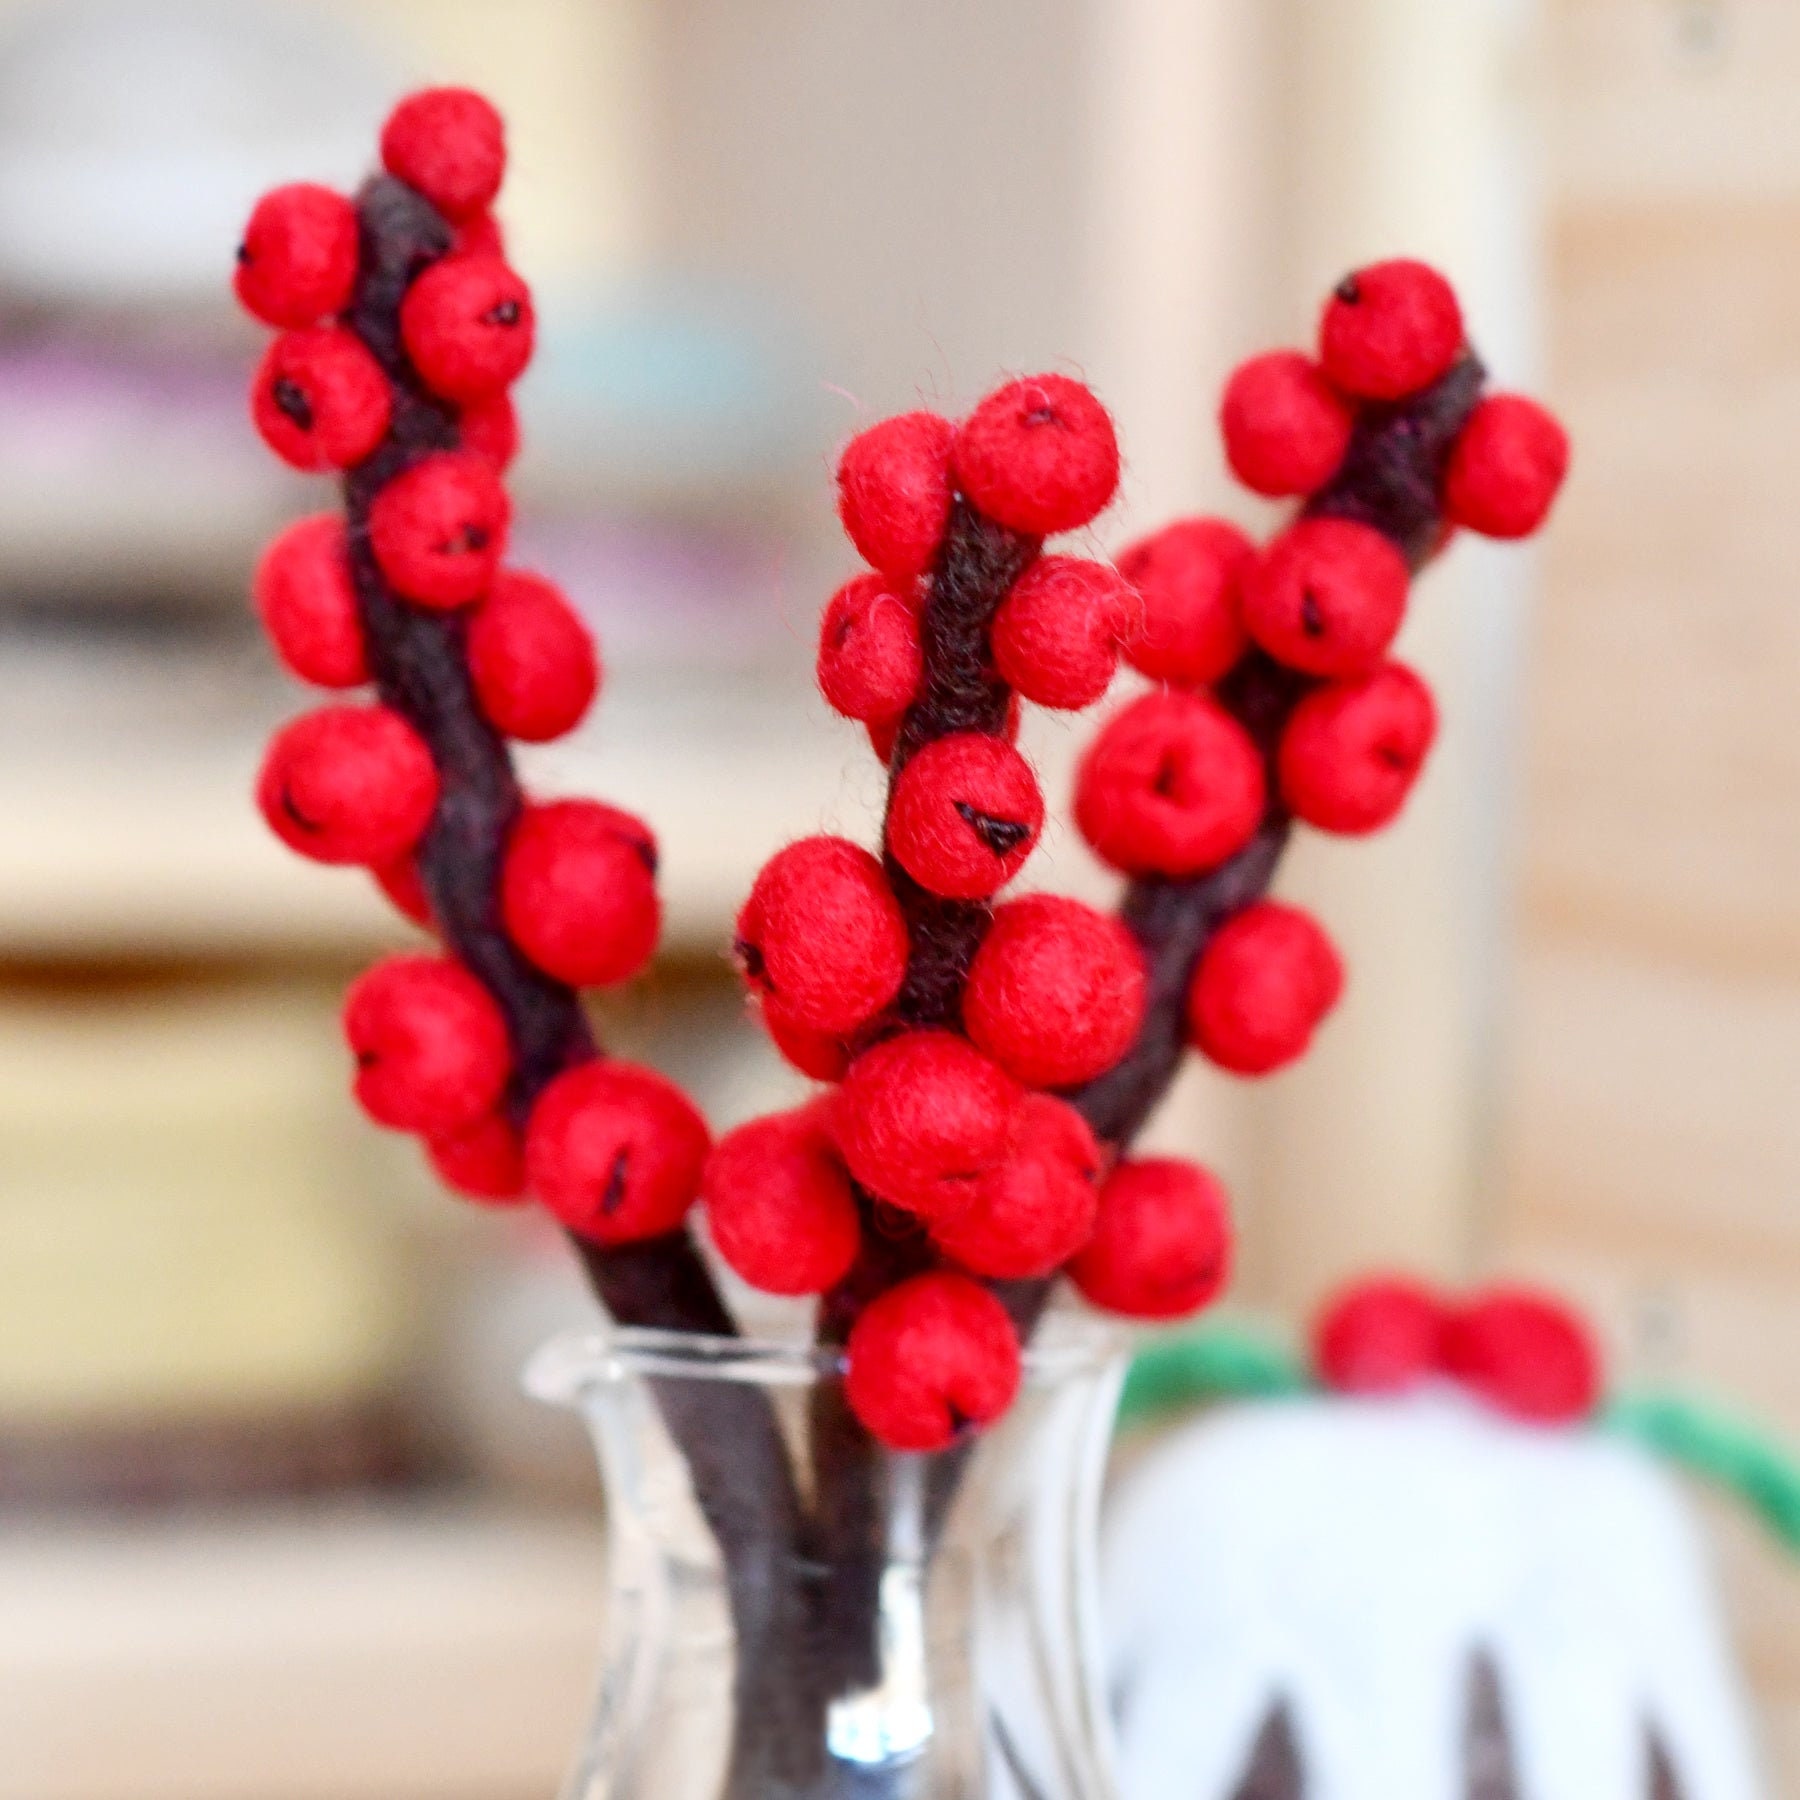 Felt Red Winter Berry Stems (Set of 3) - The Curated Parcel